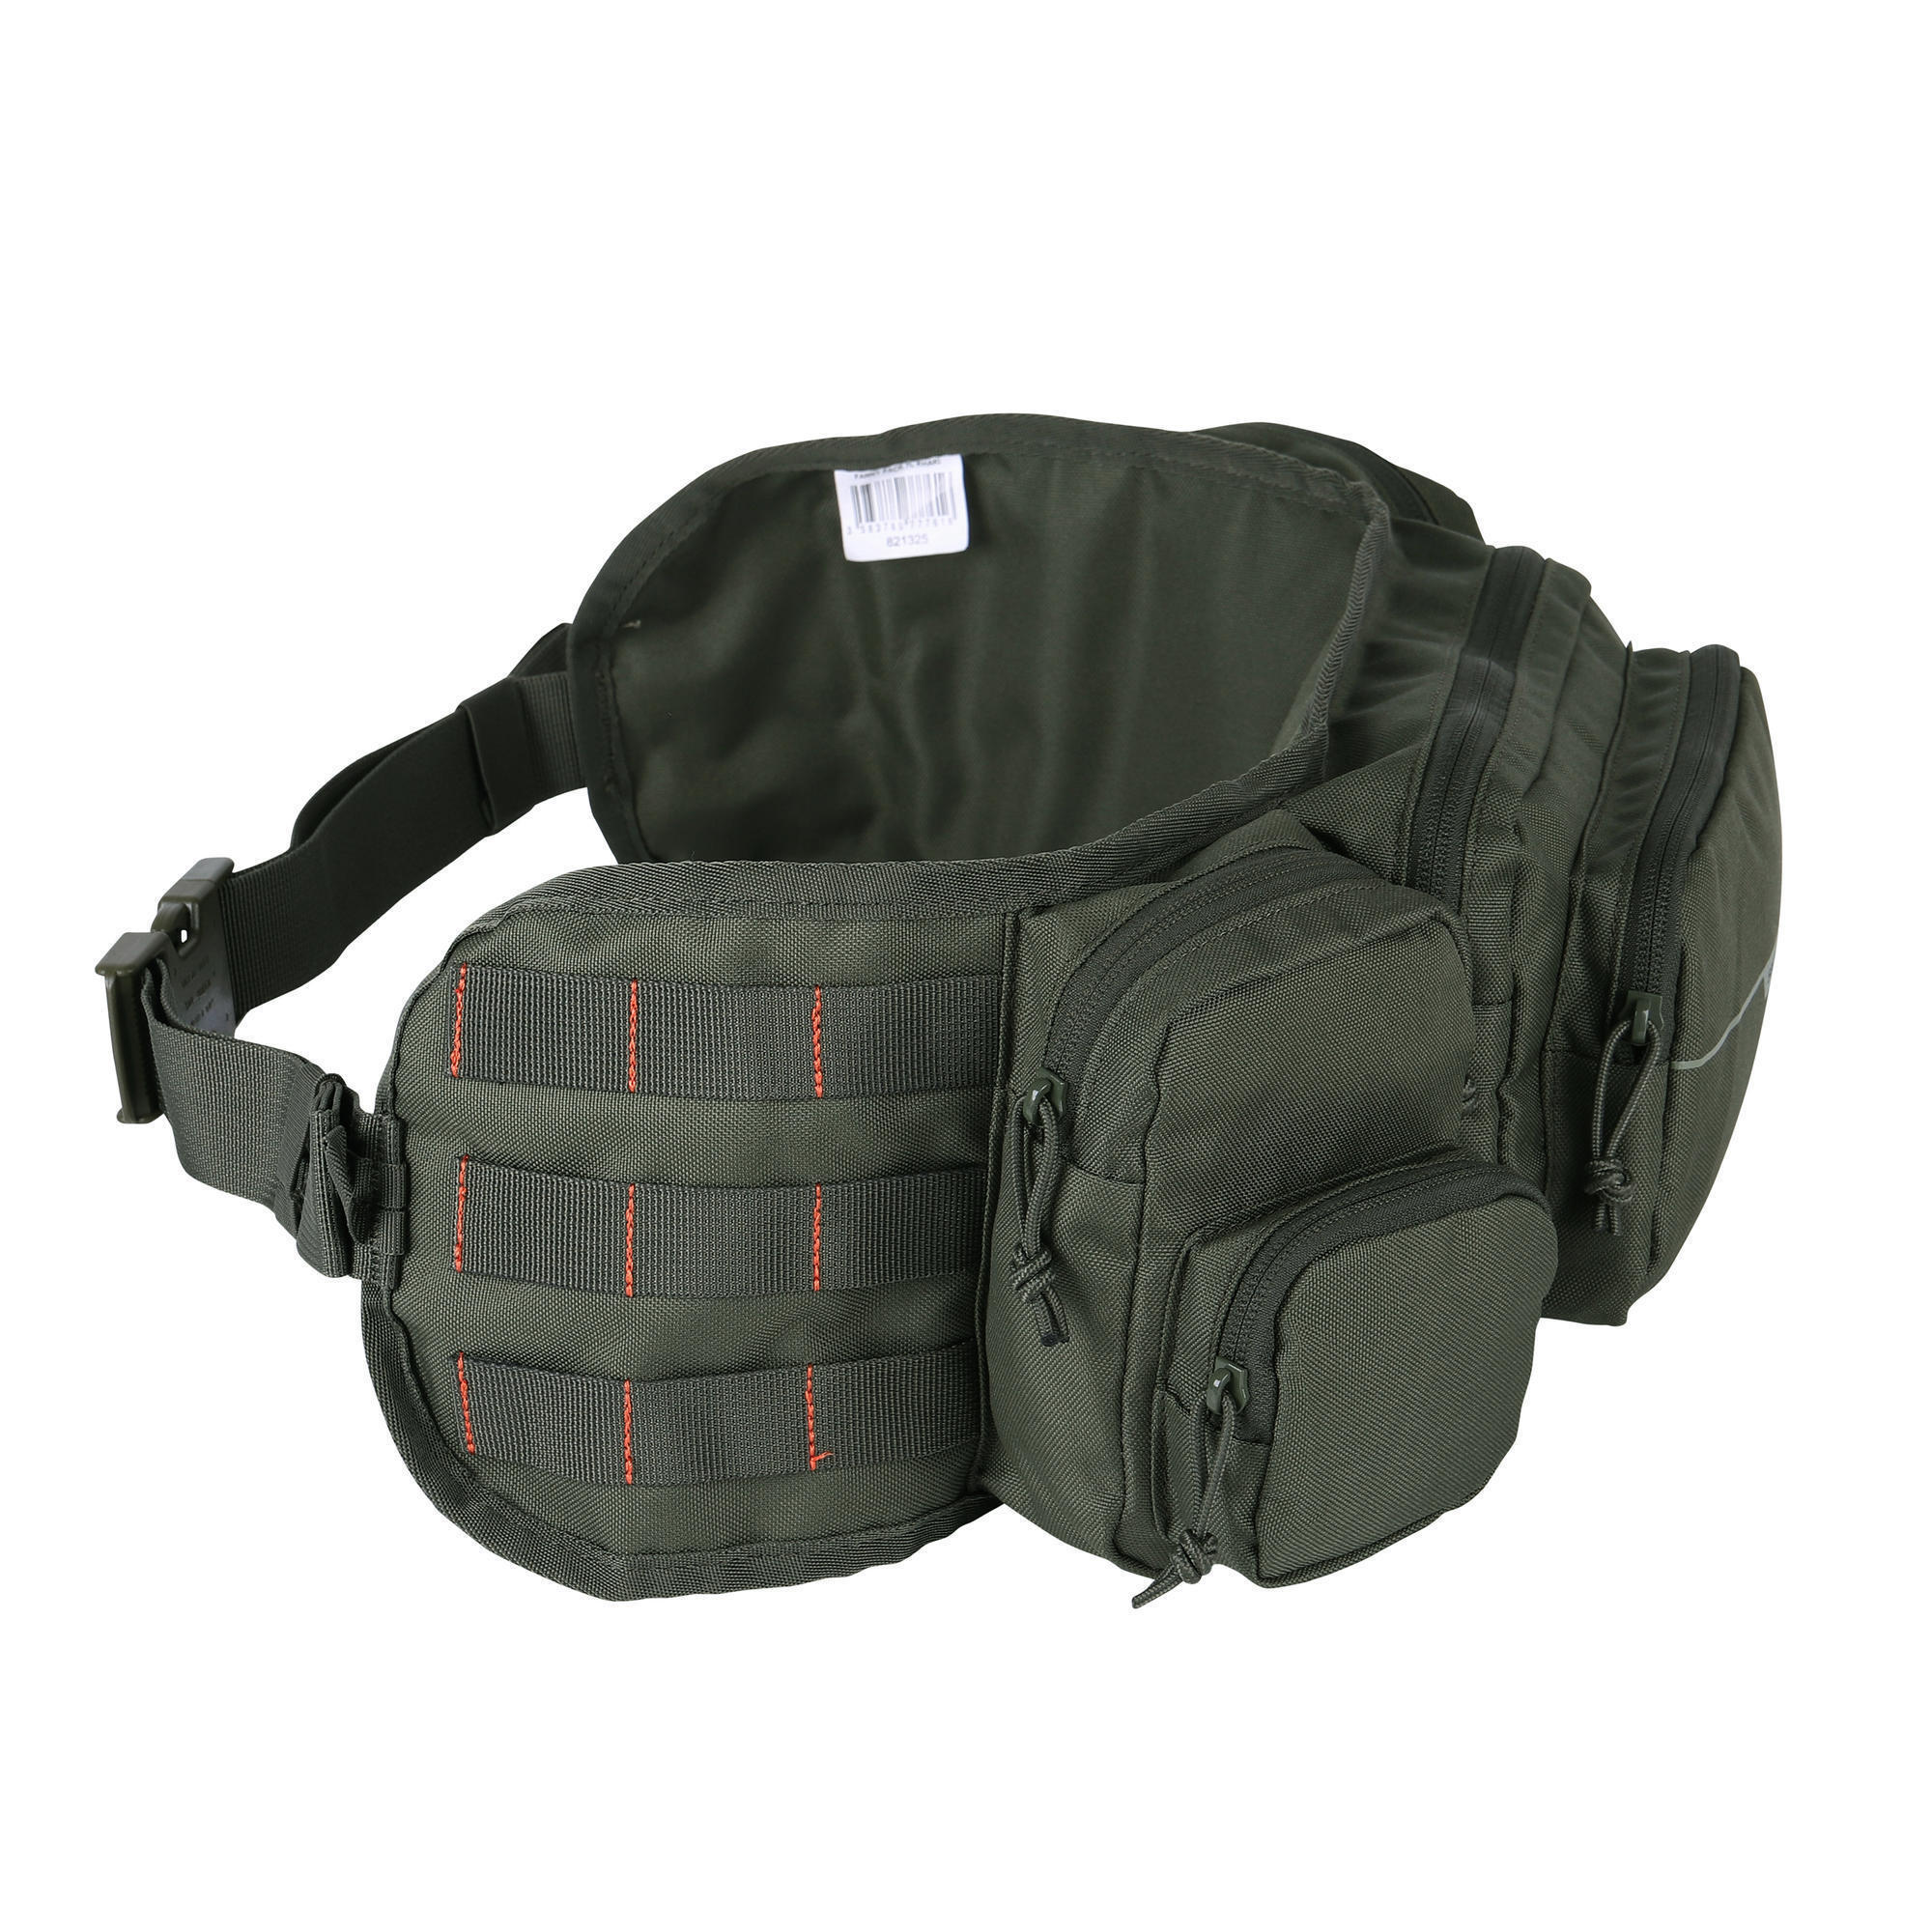 Multifunctional Tactical Fishing Belt Bag With Molle System For Outdoor  Sports And Gear Storage From Yuntengqz, $33.36